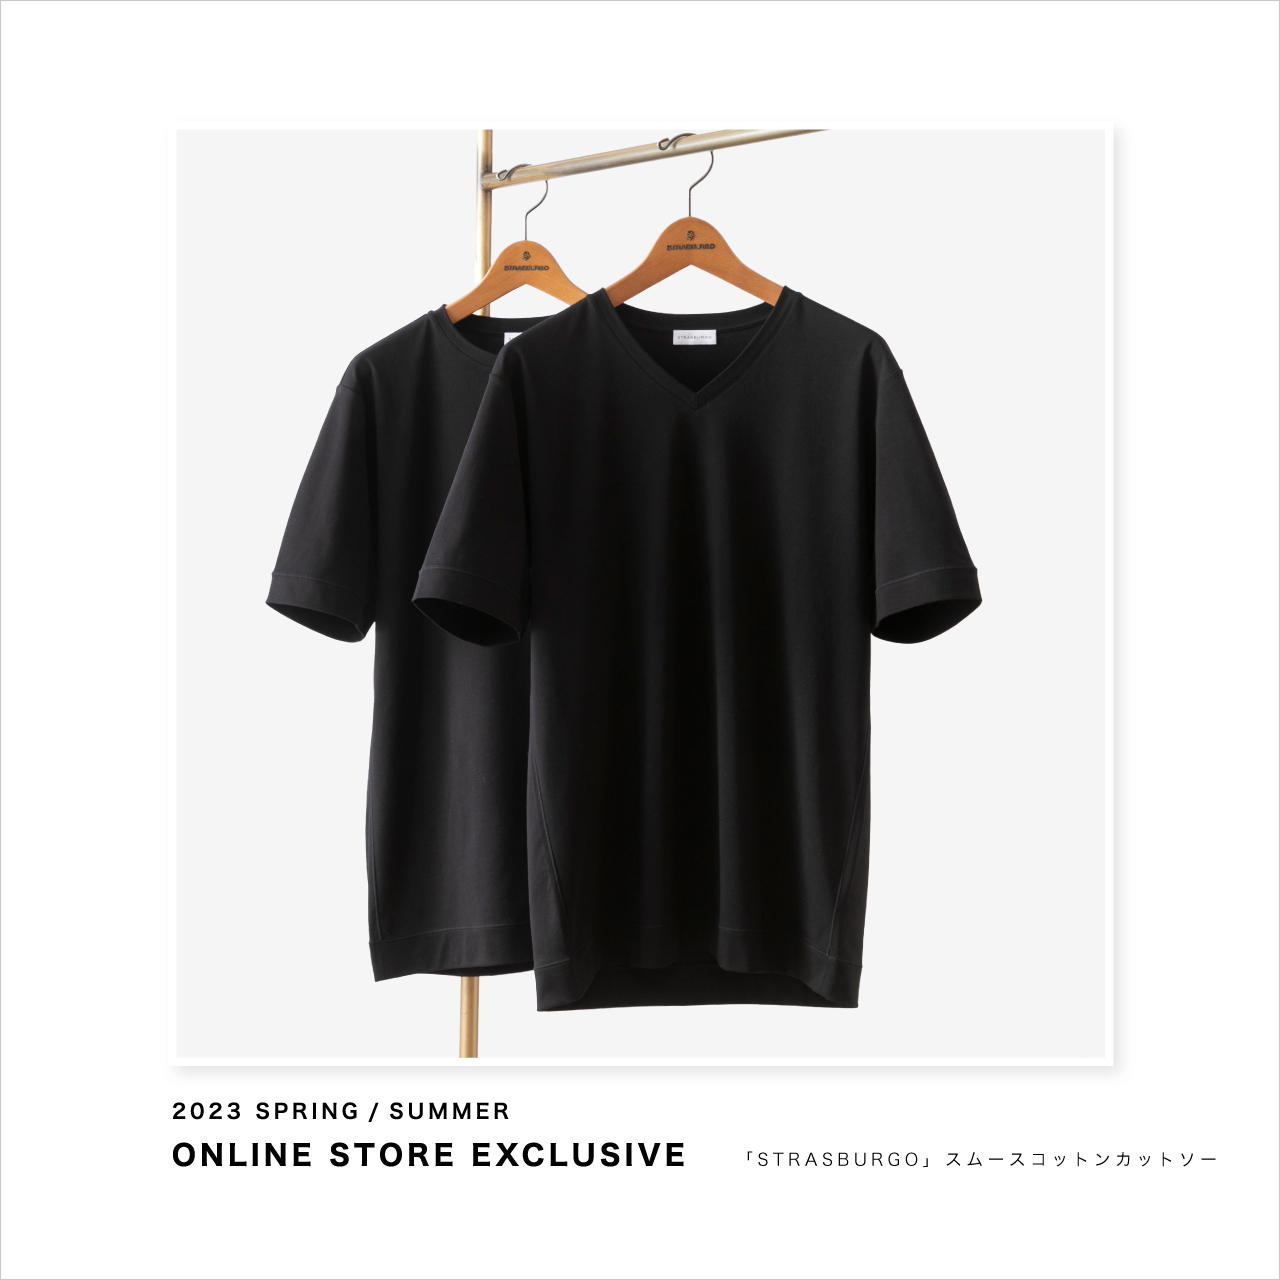  ONLINE STORE EXCLUSIVE カットソー